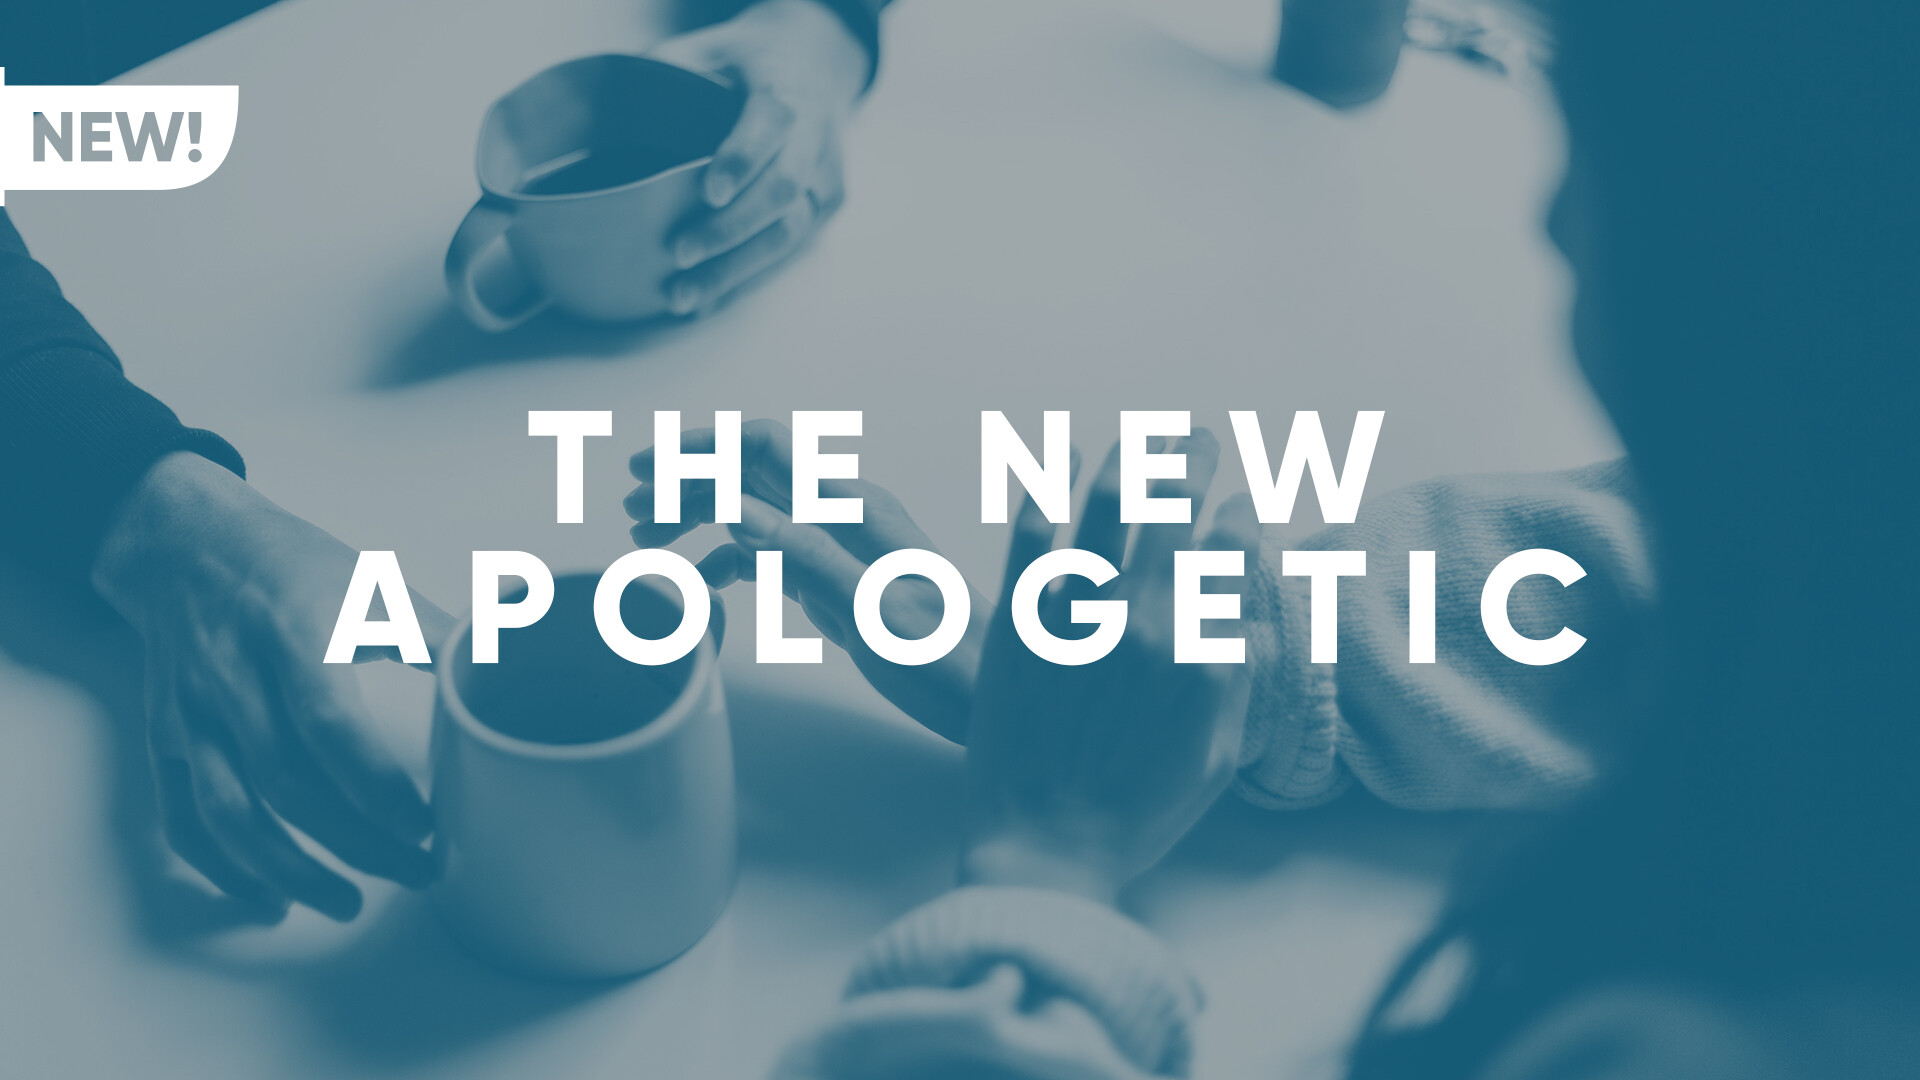 The New Apologetic